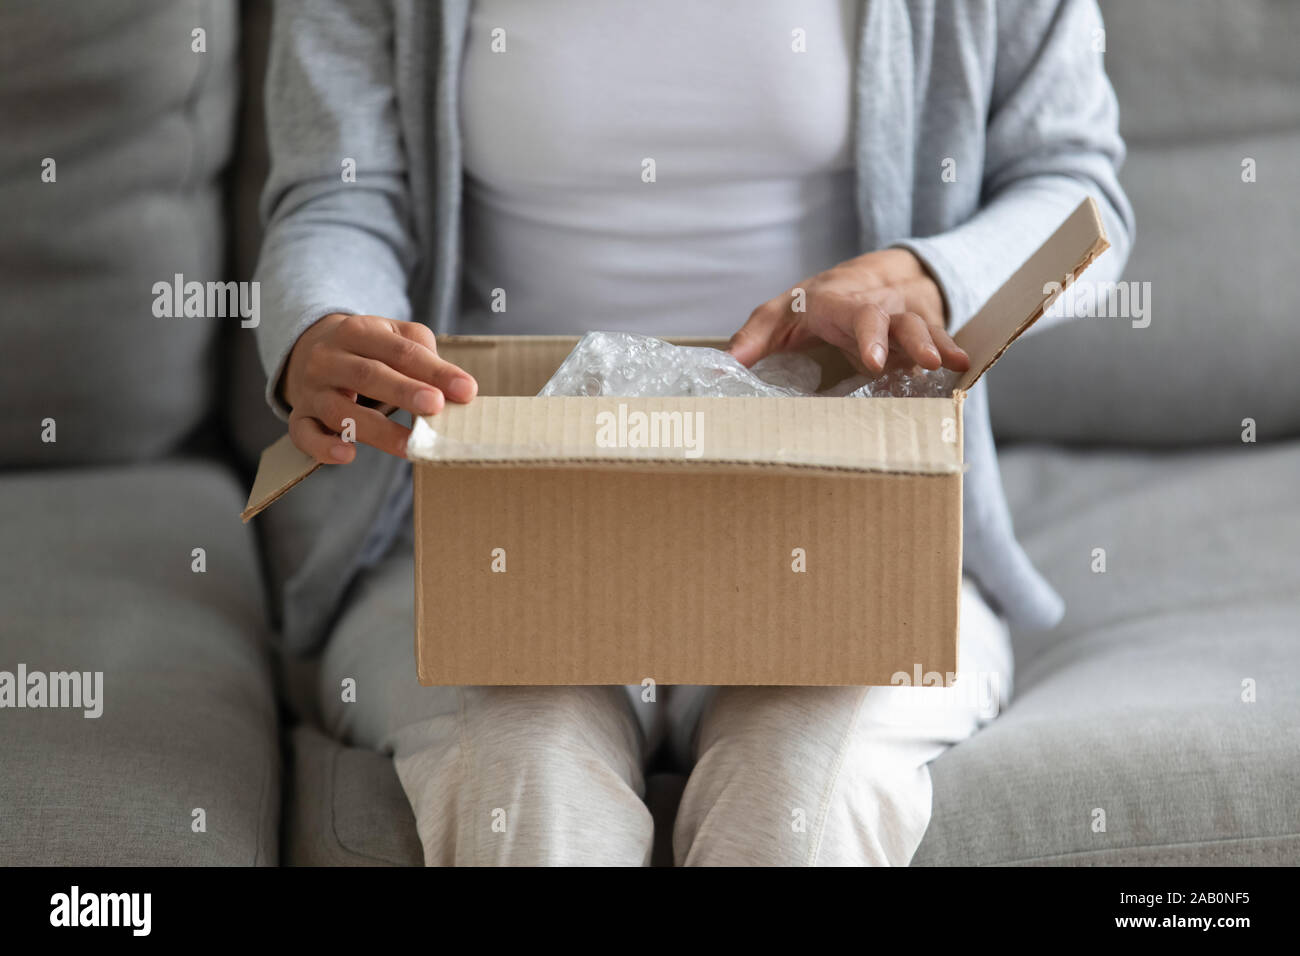 Close up view on woman lap is small carton box Stock Photo